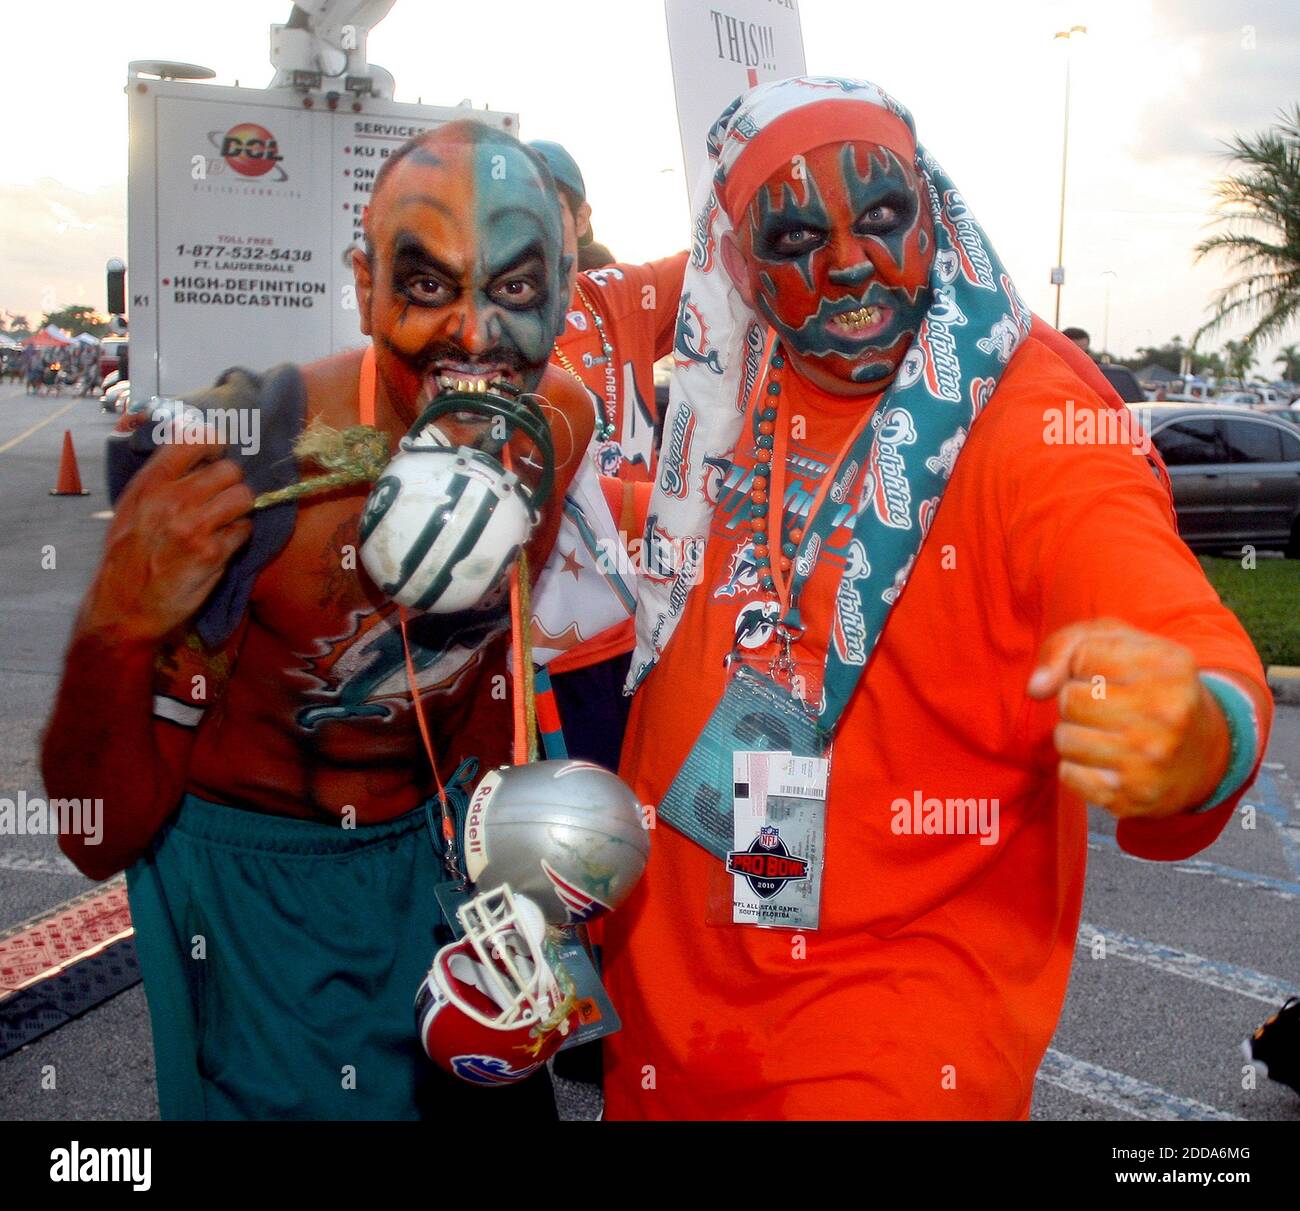 NO FILM, NO VIDEO, NO TV, NO DOCUMENTARY - Dolphins fans Manny Lopez, left, and Shane Meyers show their spirit in the home opener of Miami's game against the New York Jets at Sun Life Stadium in Miami Gardens, FL, USA on September 26, 2010. Photo by C.M. Guerrero/El Nuevo Herald/MCT/Cameleon/ABACAPRESS.COM Stock Photo